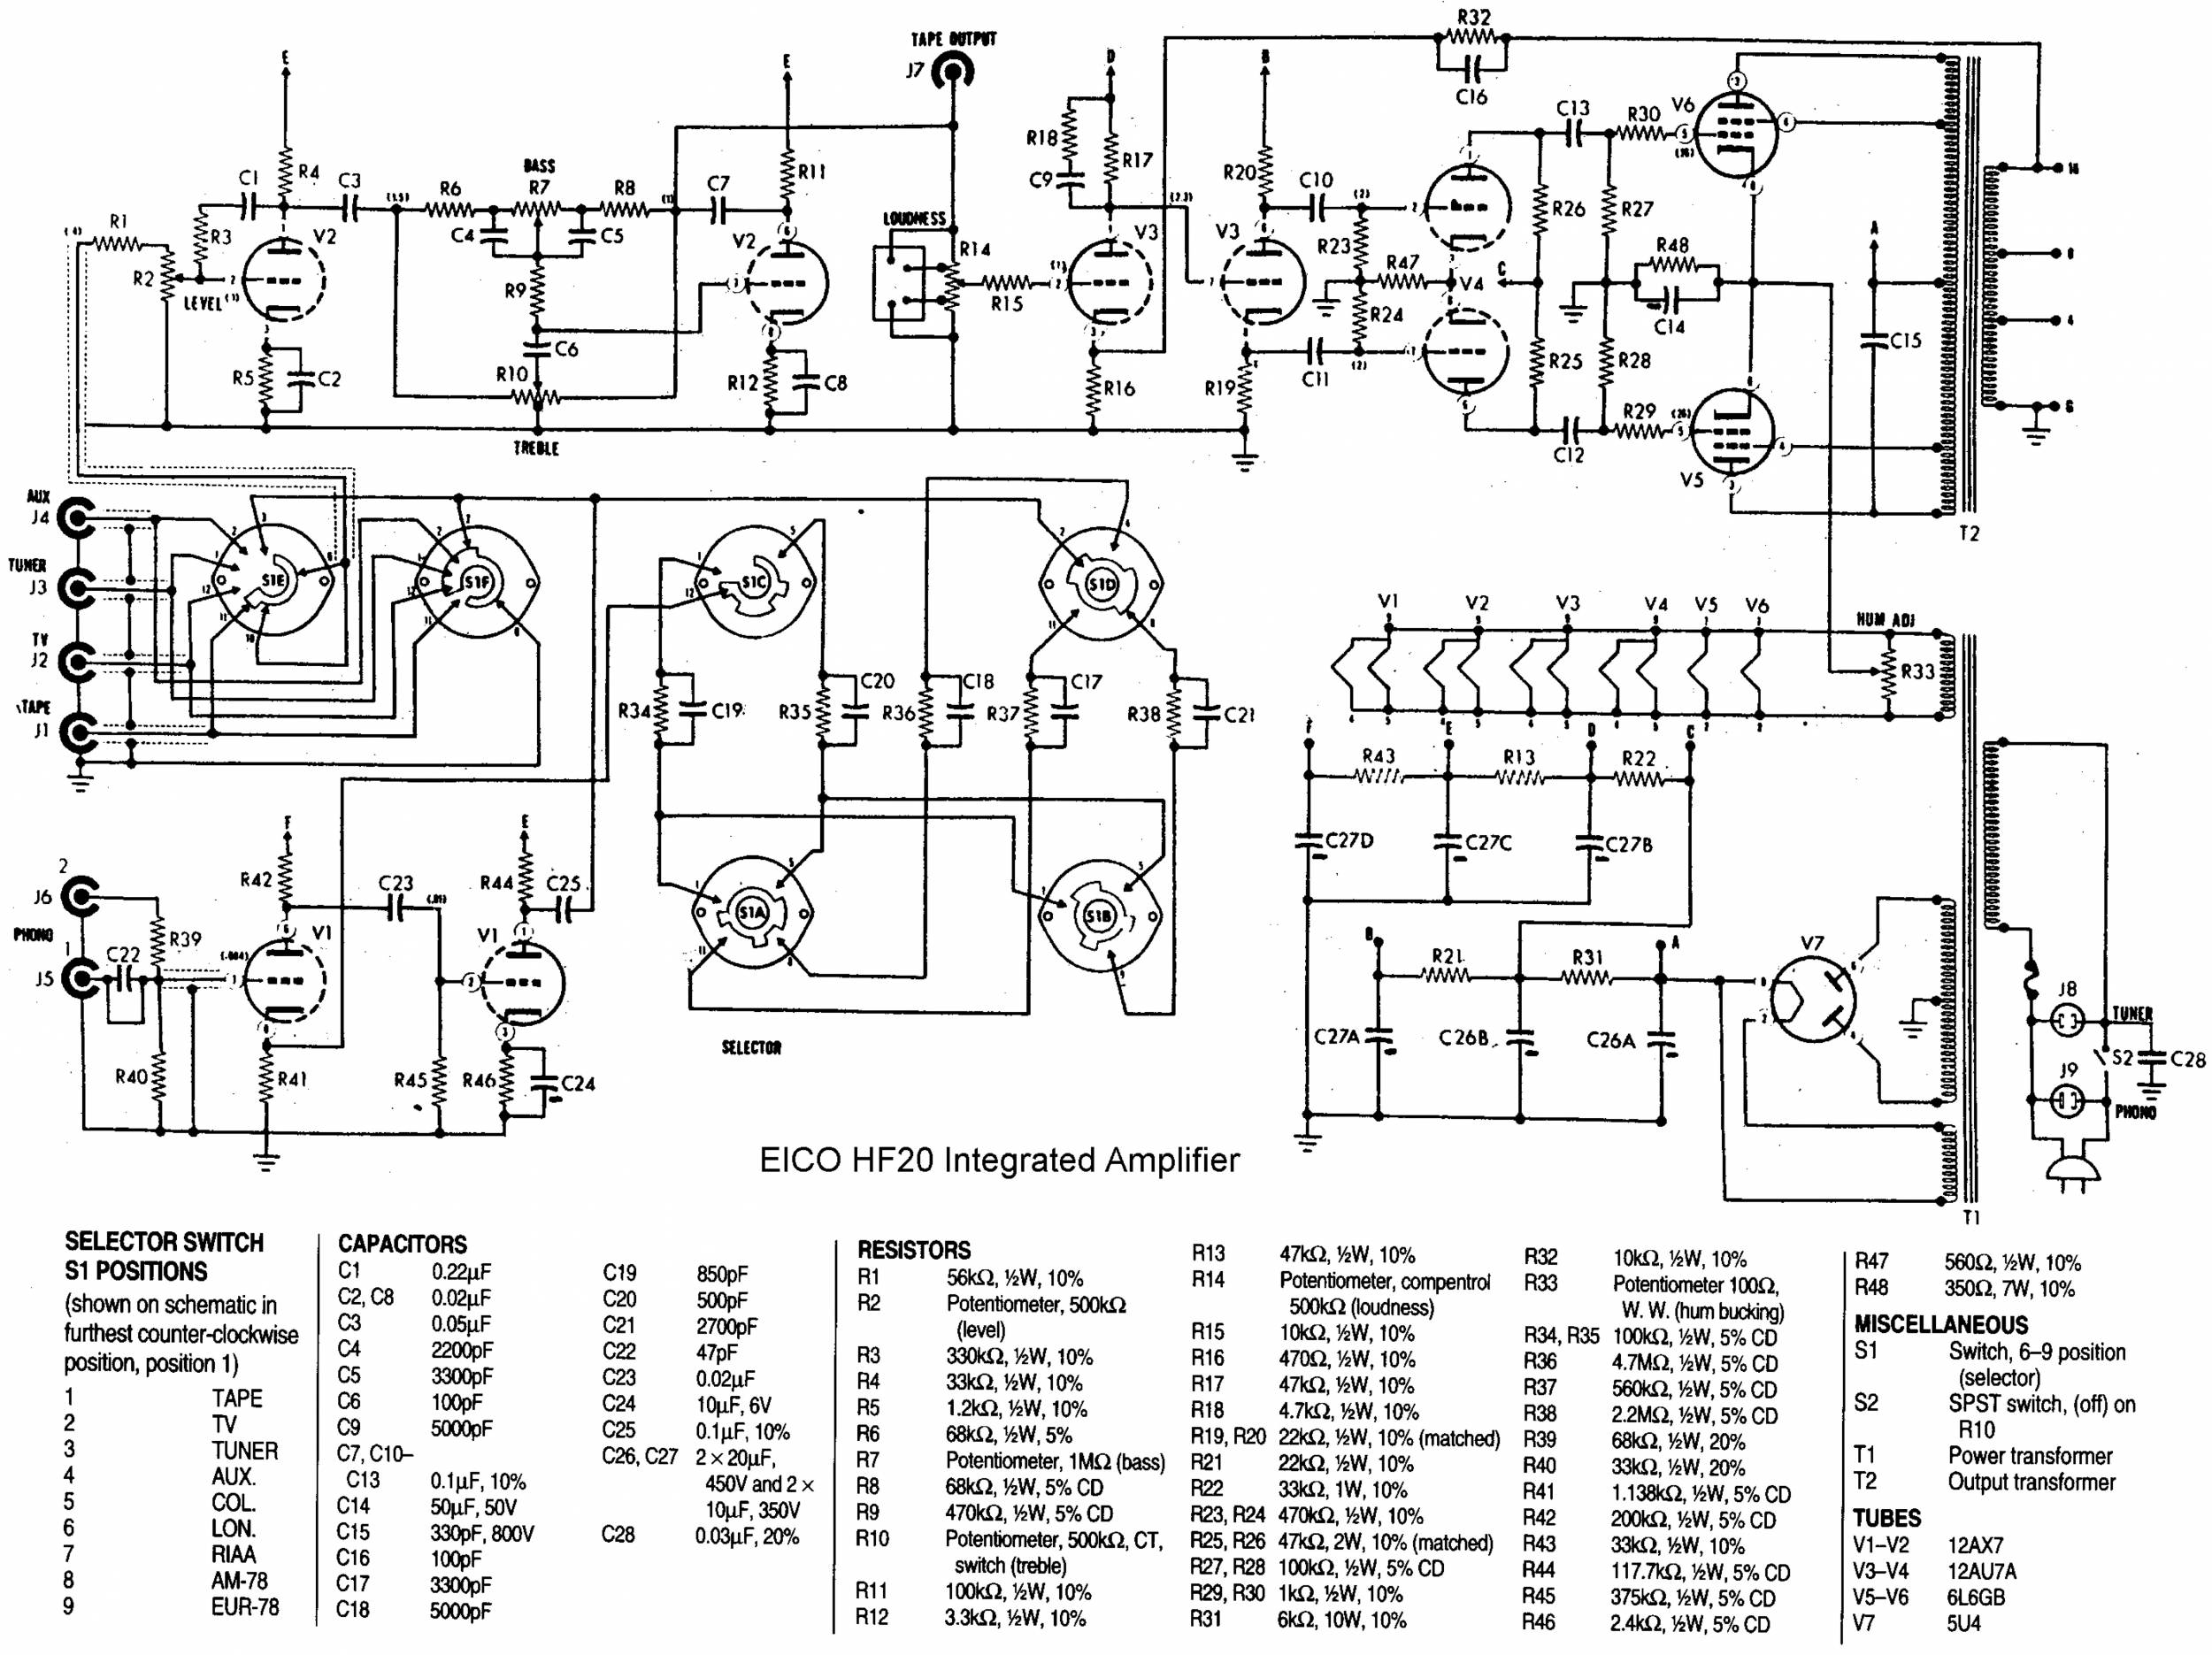 eico-hf20s-integrated-amplifier-schematic